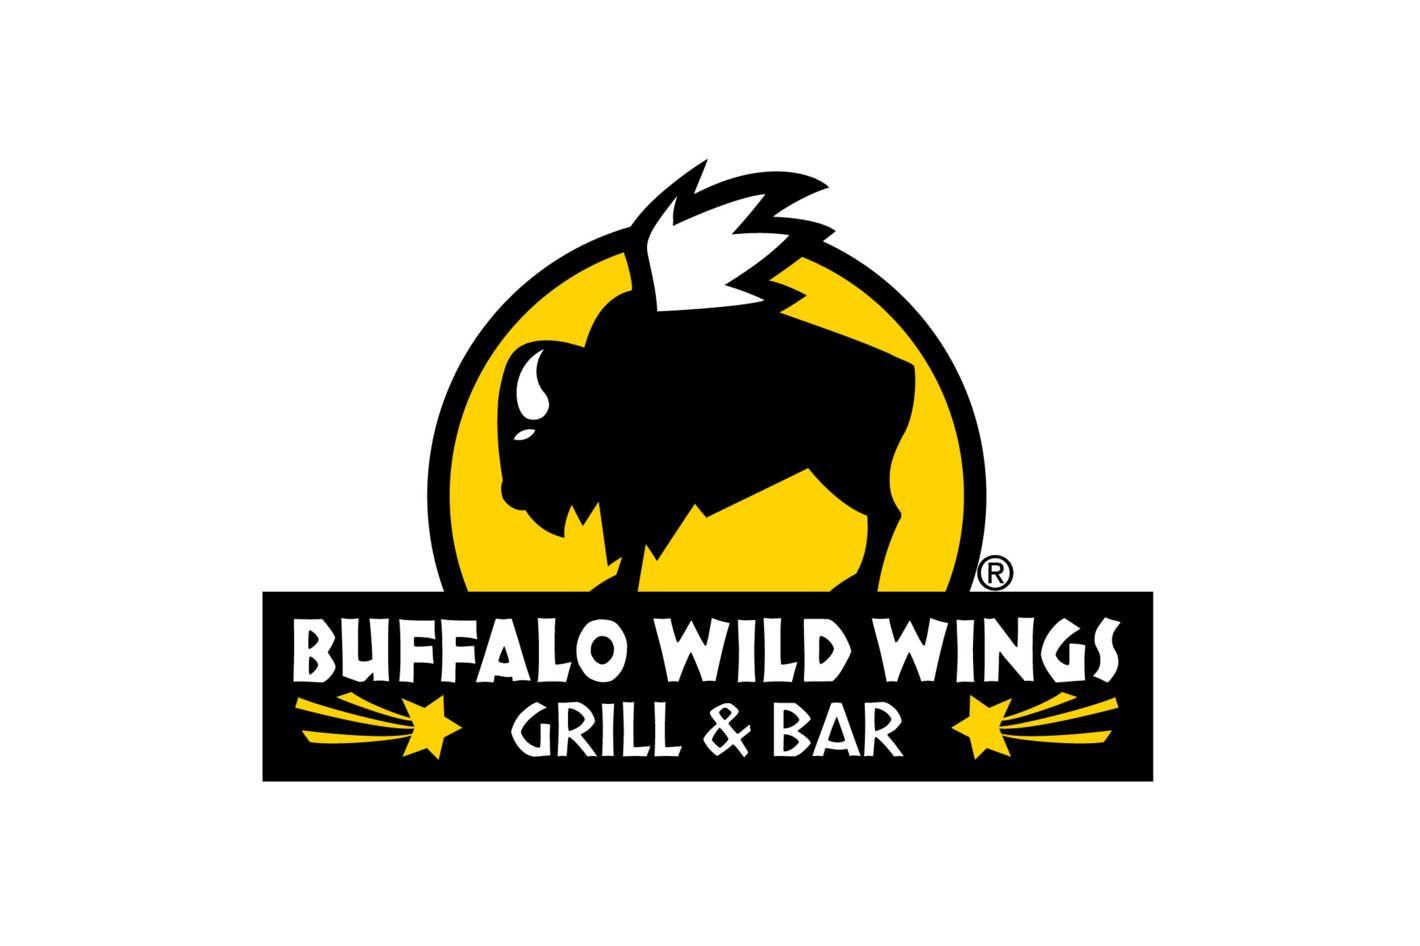 Buffalo Wild Wings Logo - Dine-and-Dash at Buffalo Wild Wings Leads to High-Speed Chase